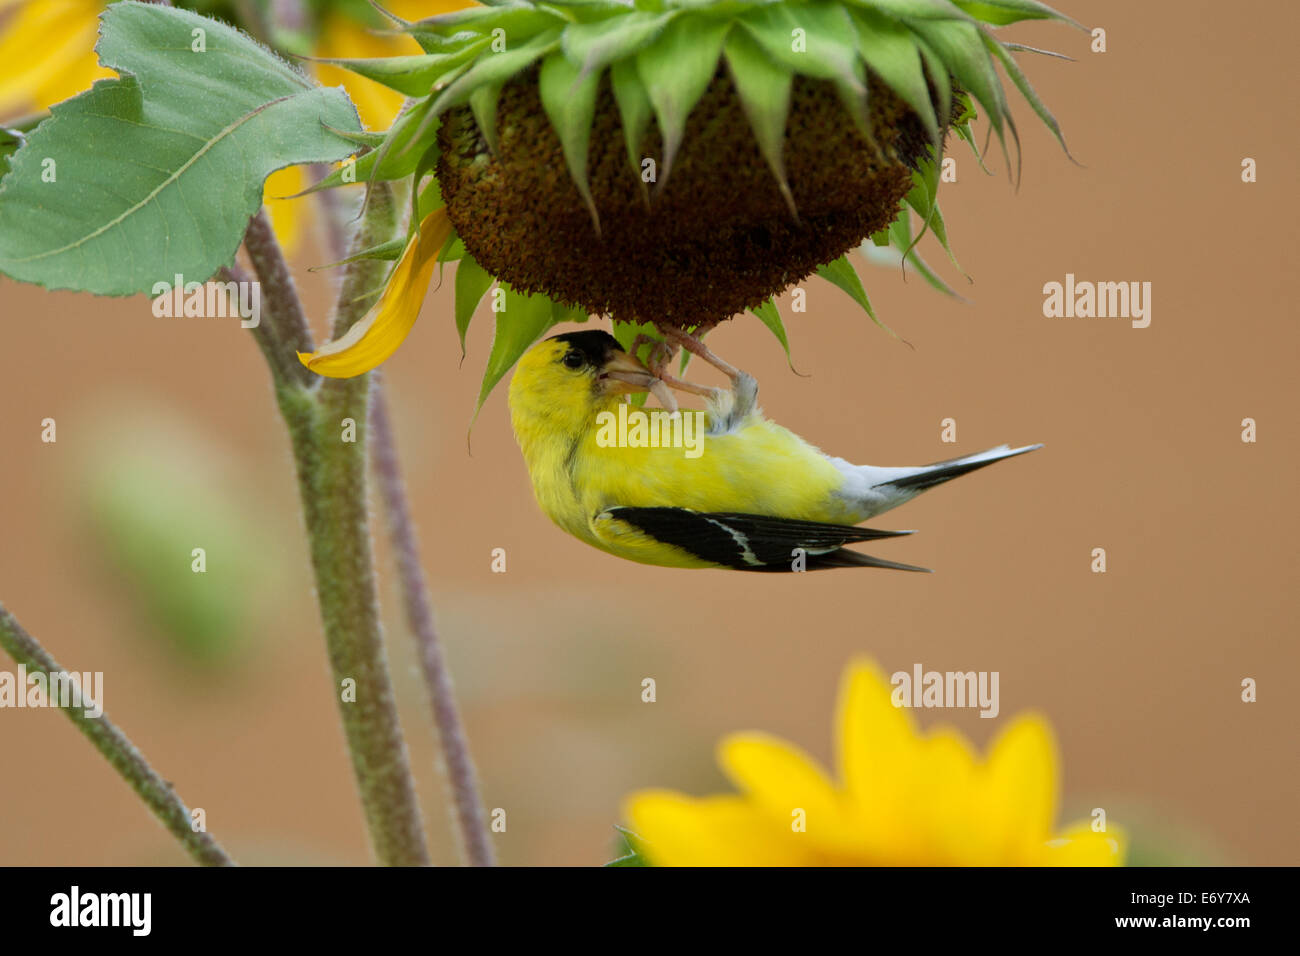 American Goldfinch in Sunflowers perching bird songbird Ornithology Science Nature Wildlife Environment Stock Photo